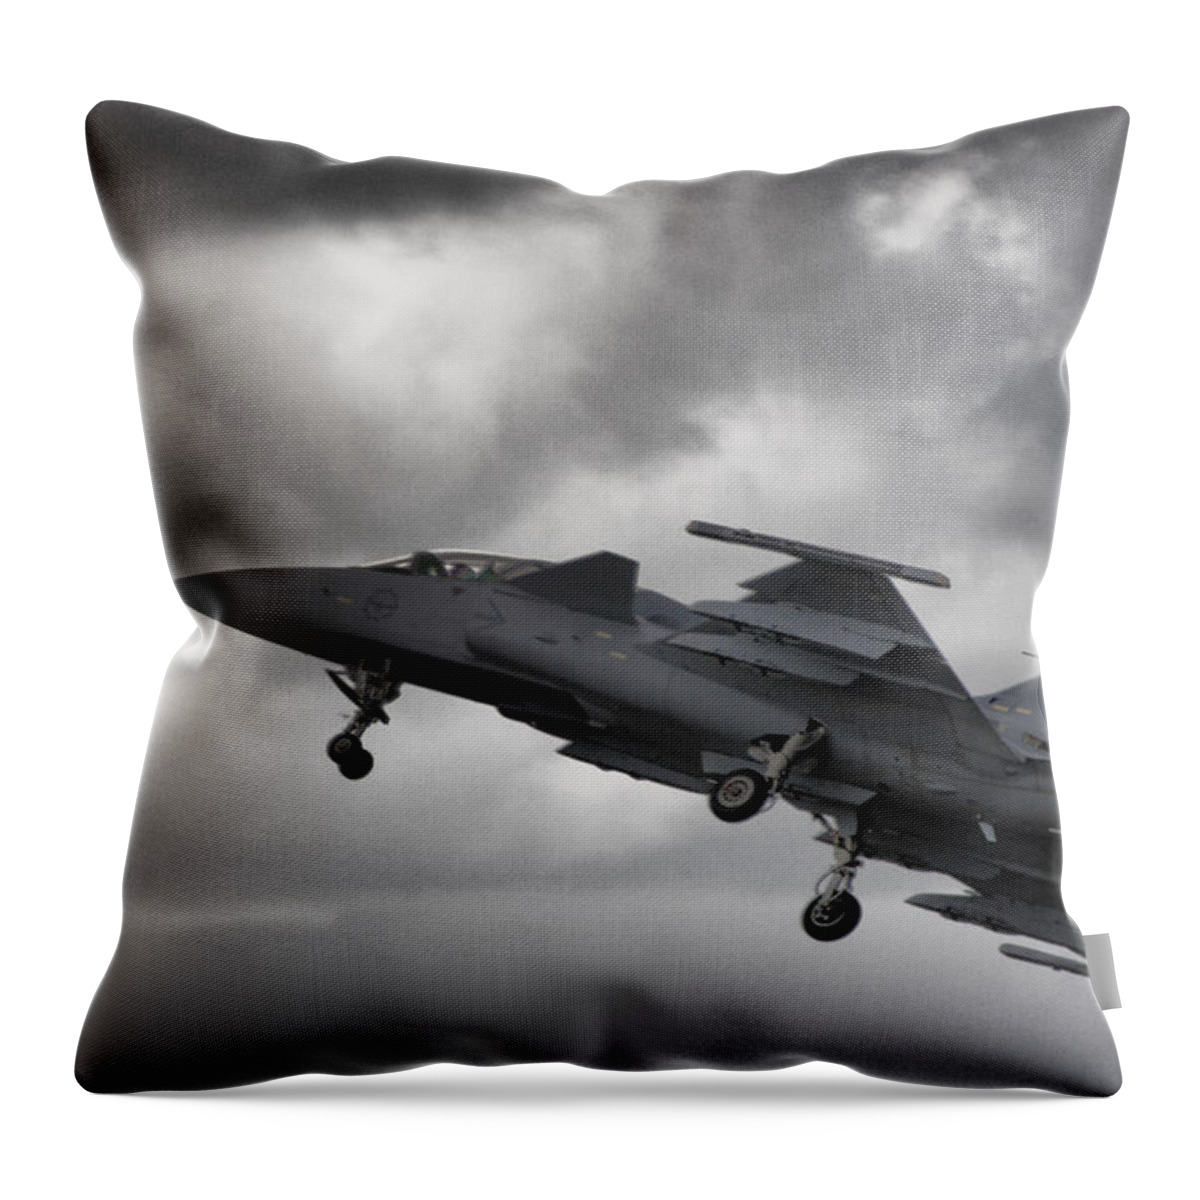 Saab Throw Pillow featuring the photograph Burn Off by Paul Job